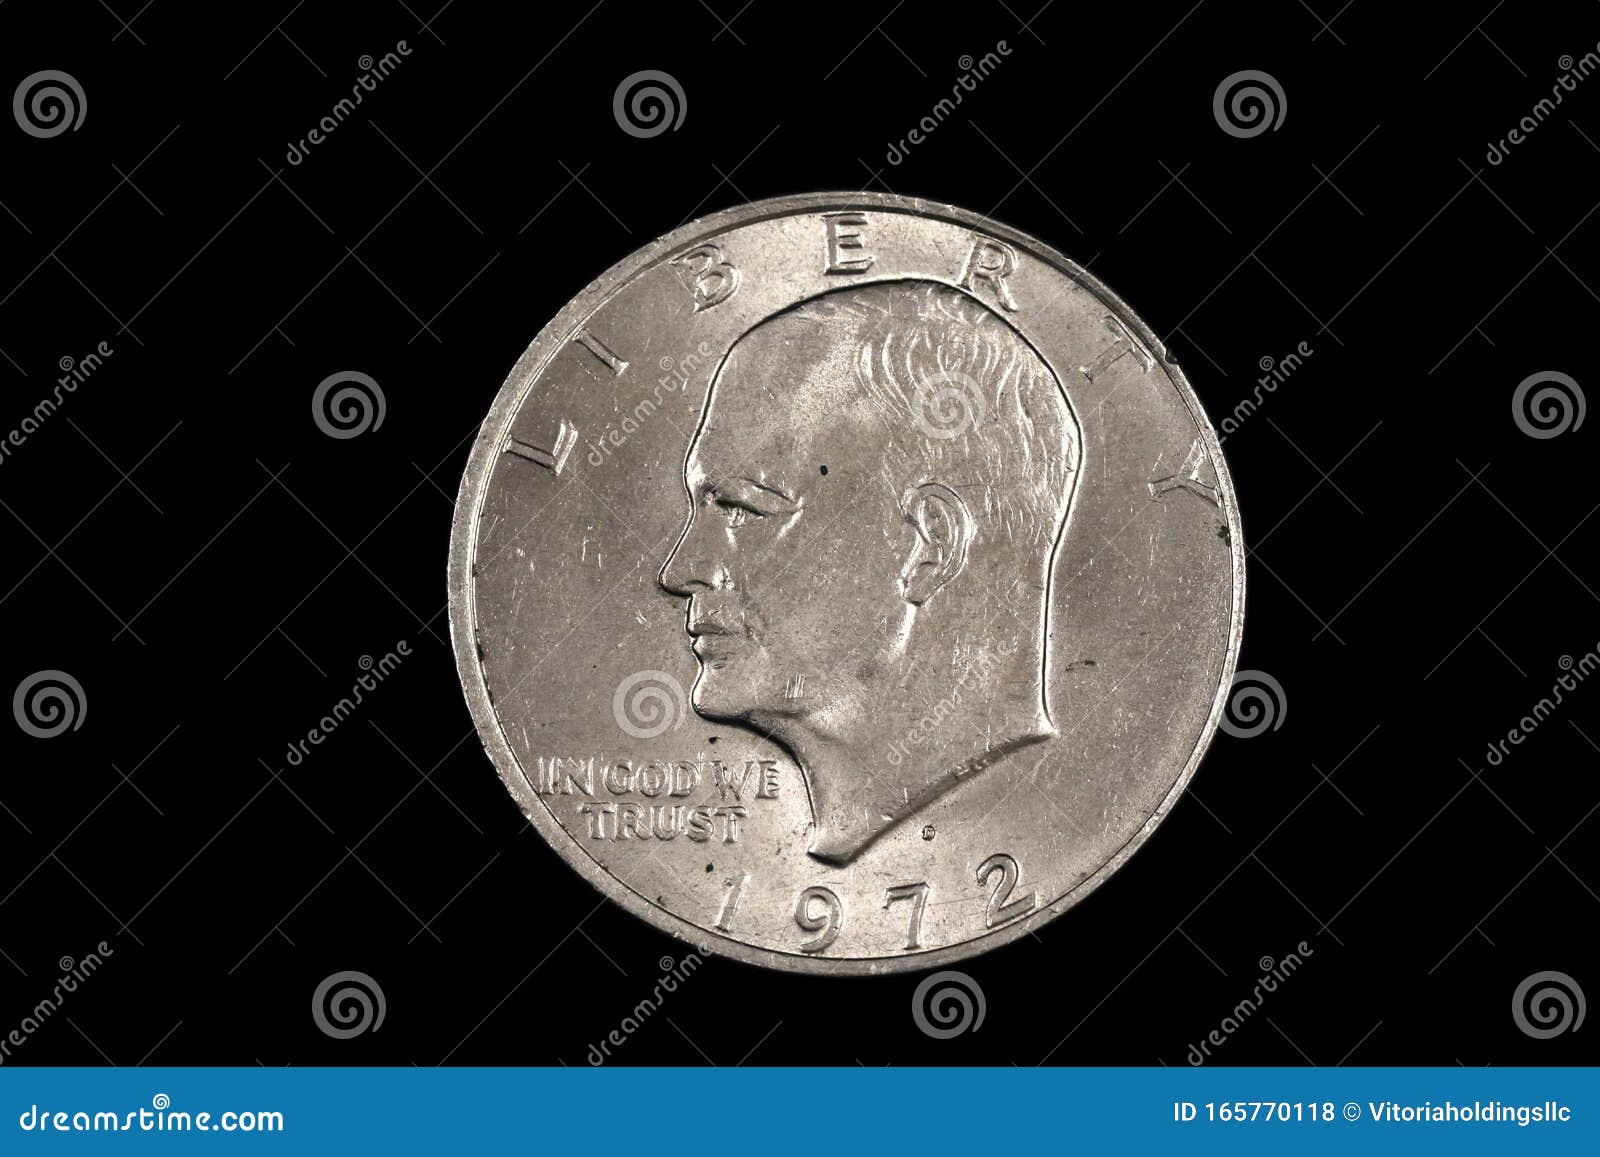 a dwight eisenhower american one dollar coin  on black